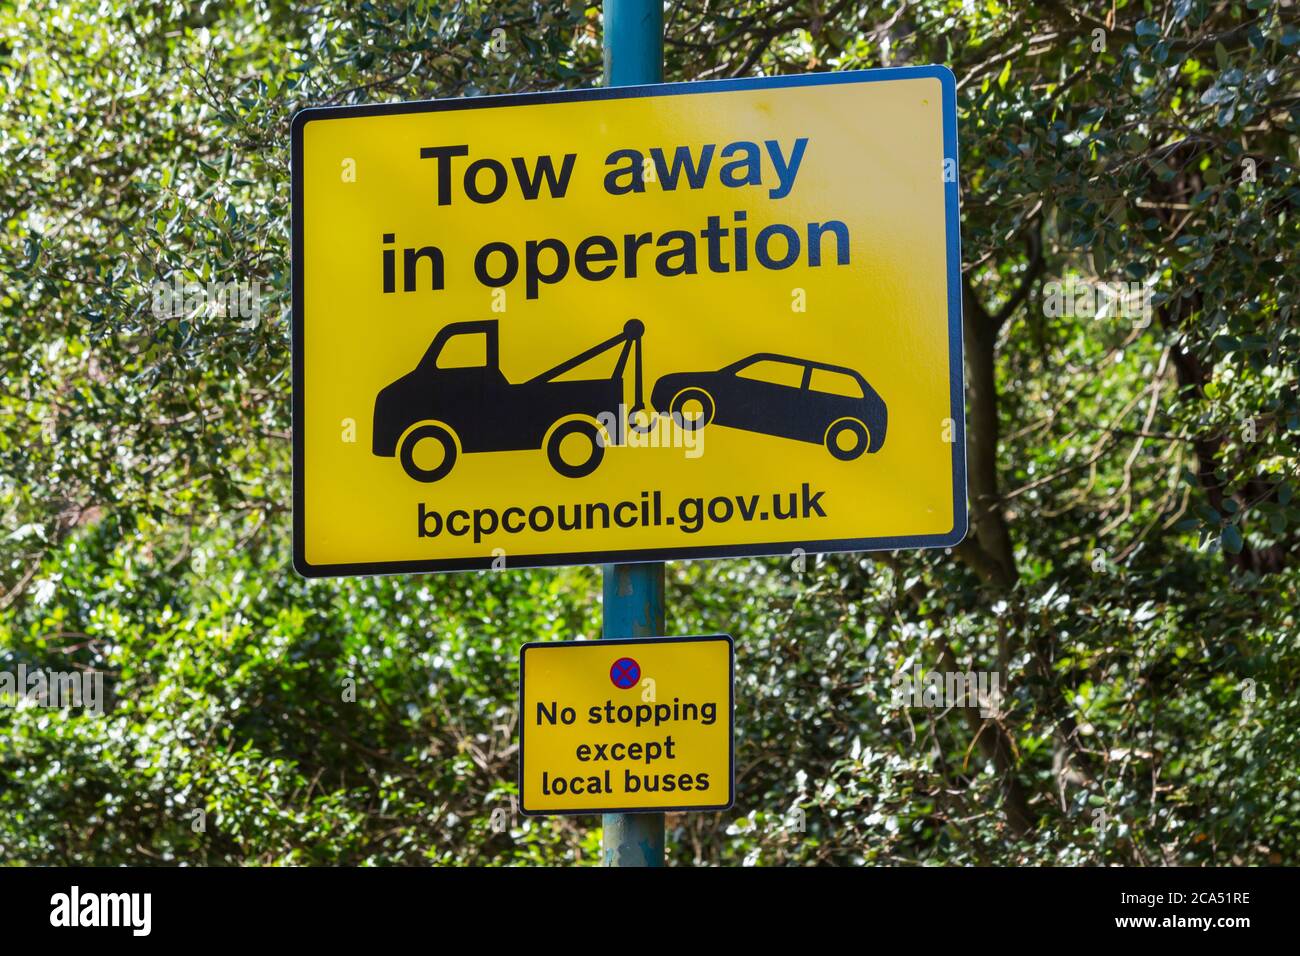 Tow away in operation and no stopping except local buses sign, road signs at Bournemouth, Dorset UK in August Stock Photo